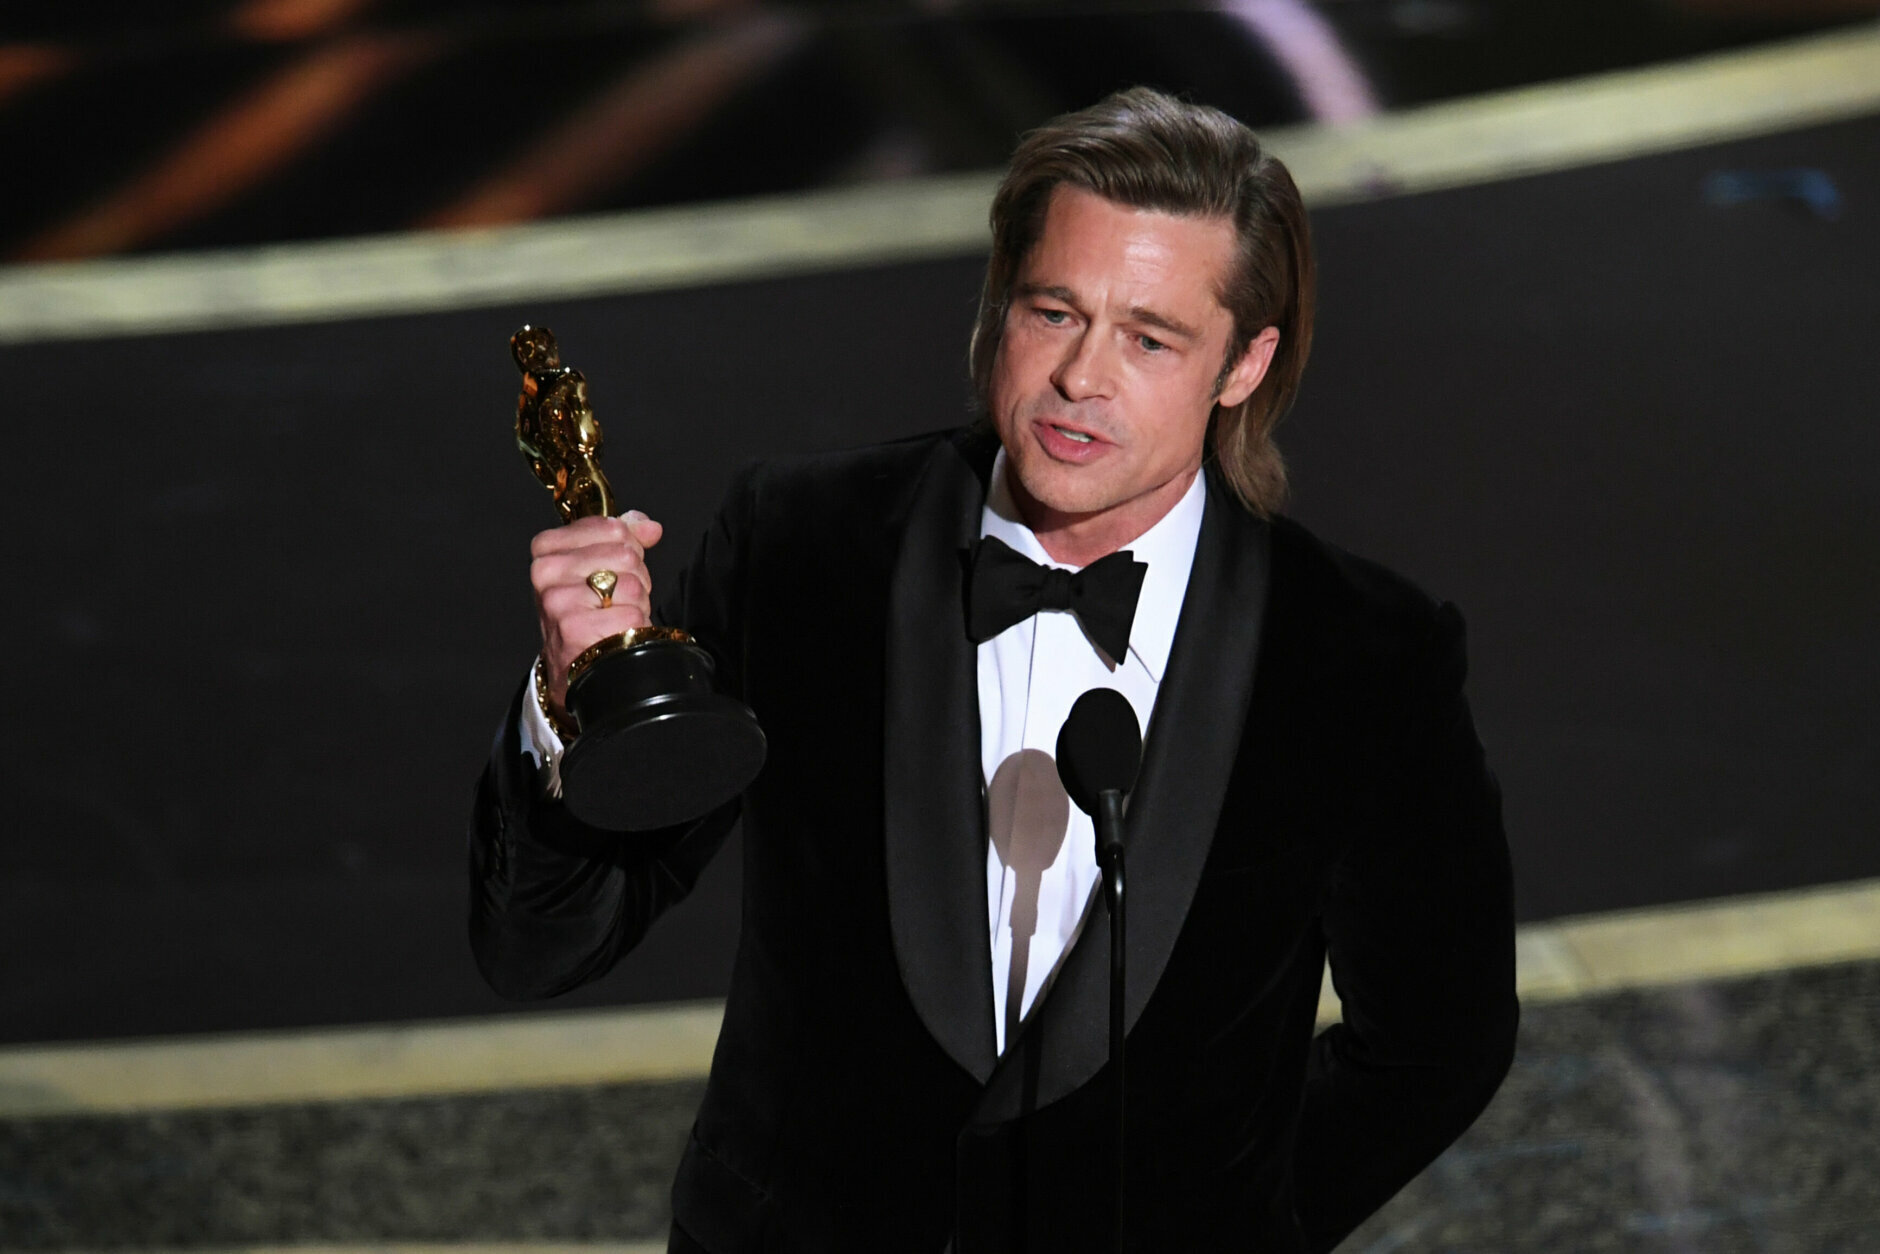 HOLLYWOOD, CALIFORNIA - FEBRUARY 09: Brad Pitt accepts the Actor in a Supporting Role award for 'Once Upon a Time...in Hollywood' onstage during the 92nd Annual Academy Awards at Dolby Theatre on February 09, 2020 in Hollywood, California. (Photo by Kevin Winter/Getty Images)